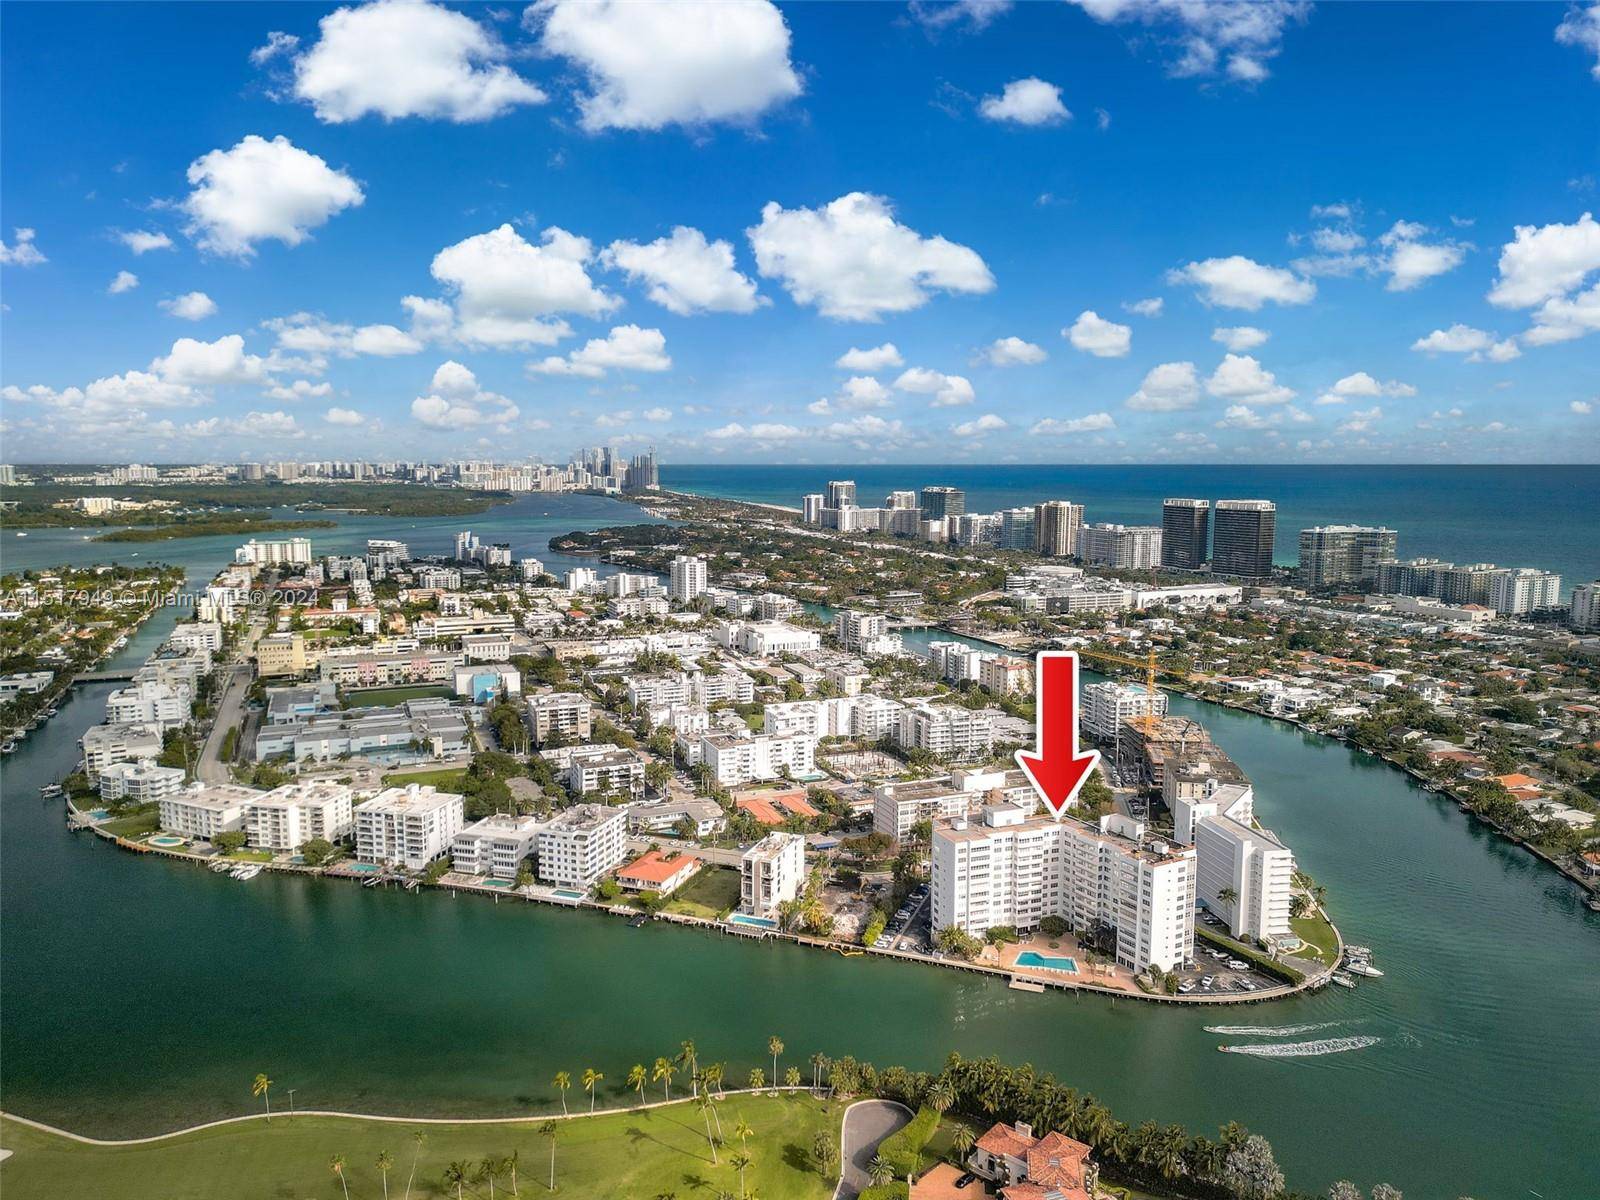 Enjoy panoramic views of Biscayne Bay and Indian Creek golf course from this 1150 SF condo at Blair House, Bay Harbor Islands.